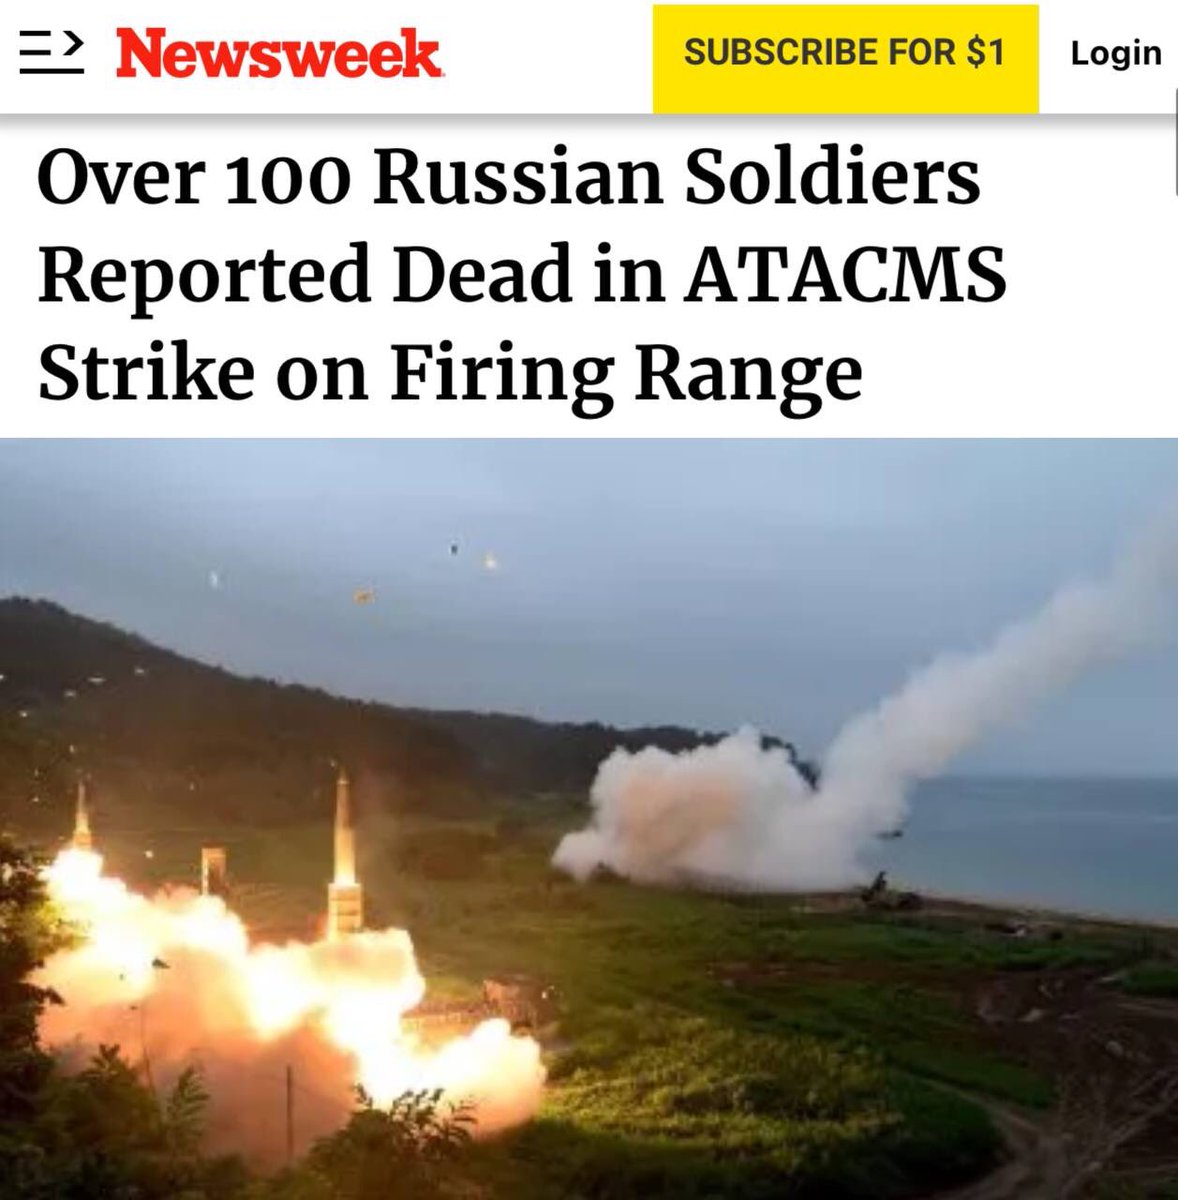 👍100+ russian soldiers blown to pieces by ATACMS missiles, — Newsweek on the recent attack by the Armed Forces of Ukraine on a Russian military training ground in occupied Luhansk region.

Analysts from the ISW and OSINT projects came to the conclusion that they hit near the…